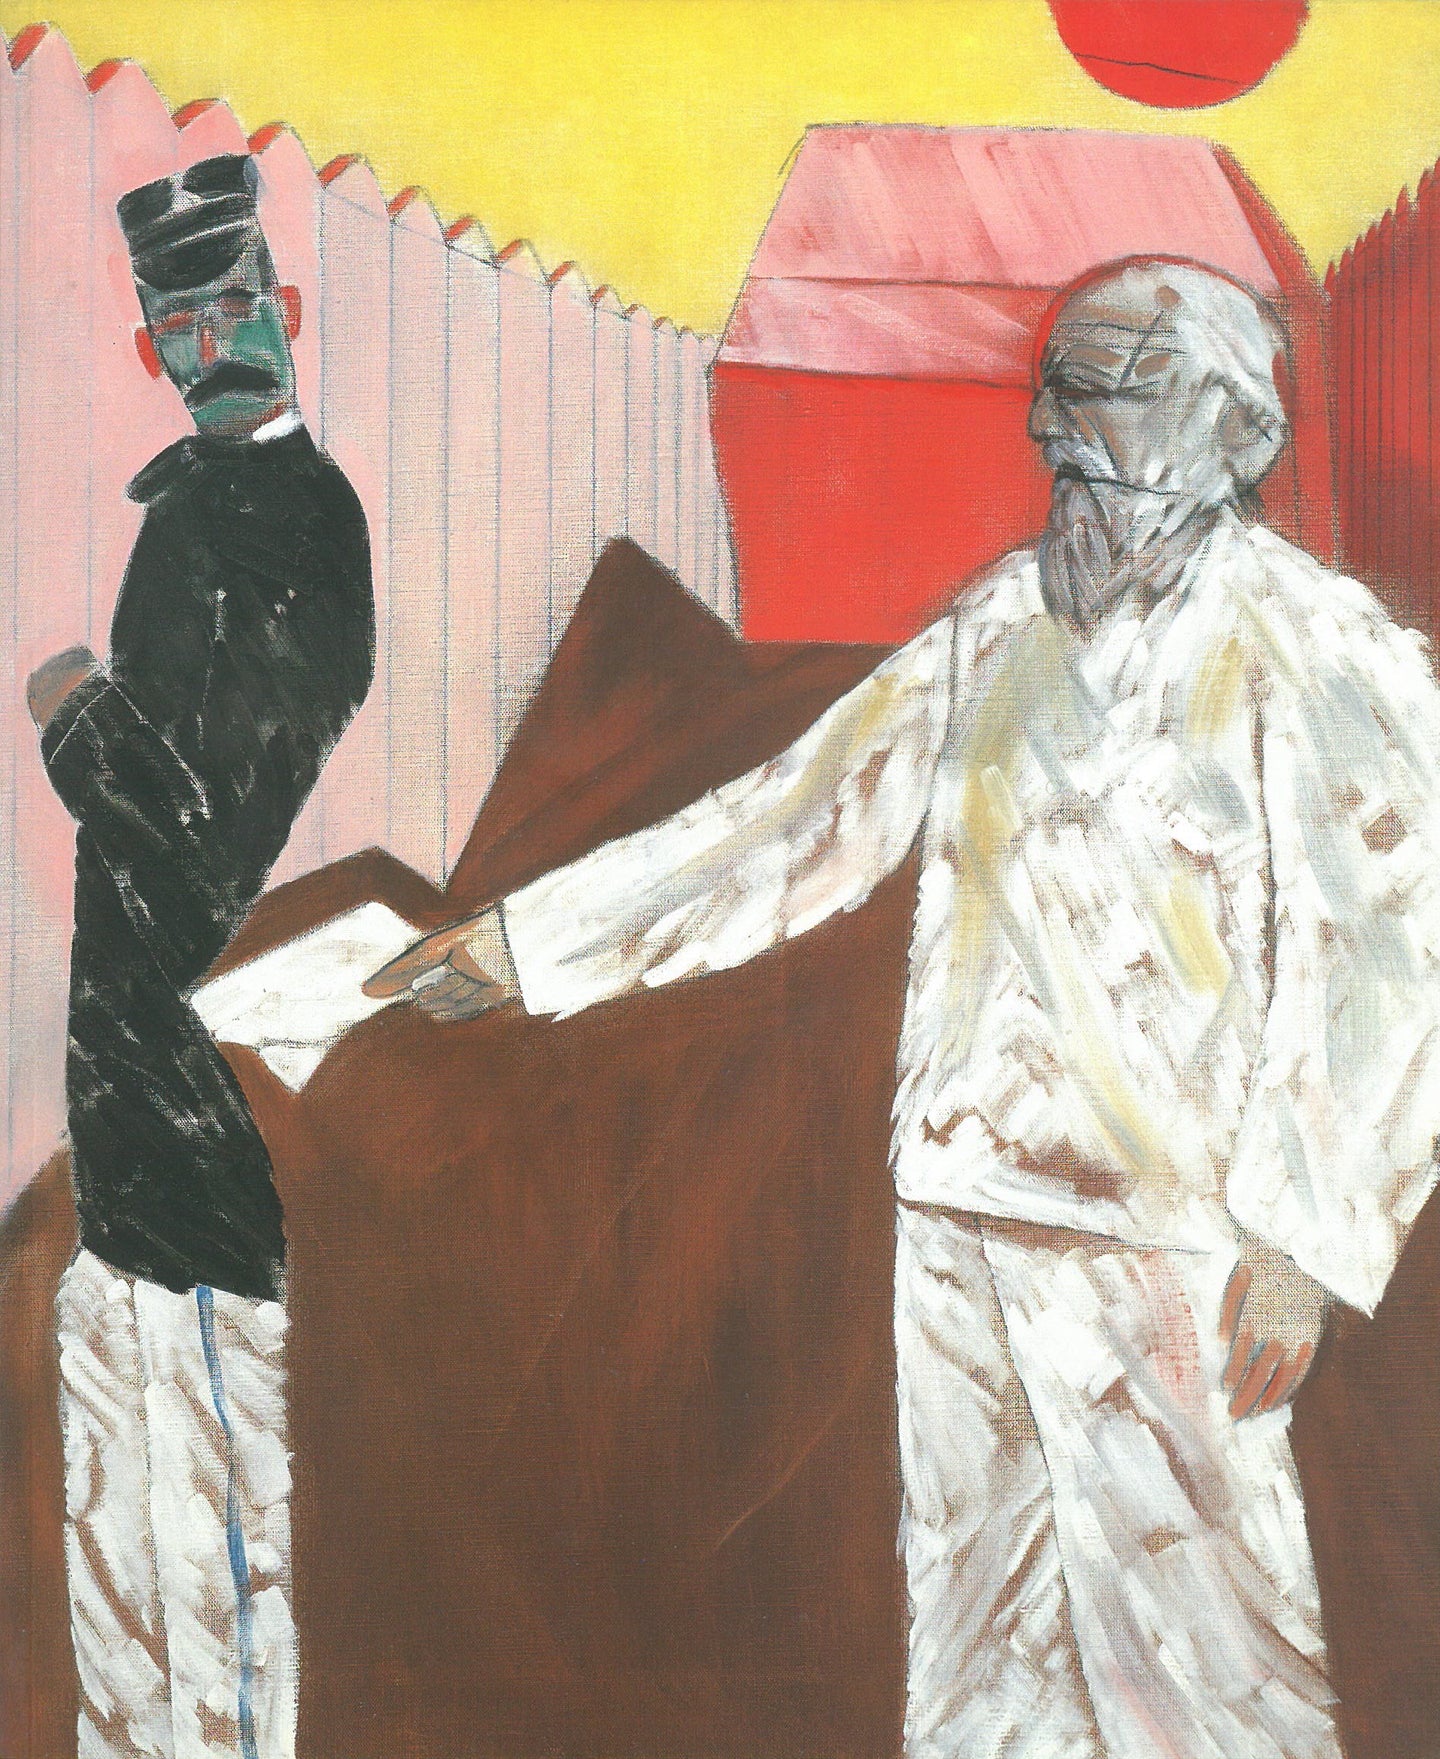 Kitaj catalogue cover featuring a painting of two men on a pink and yellow background